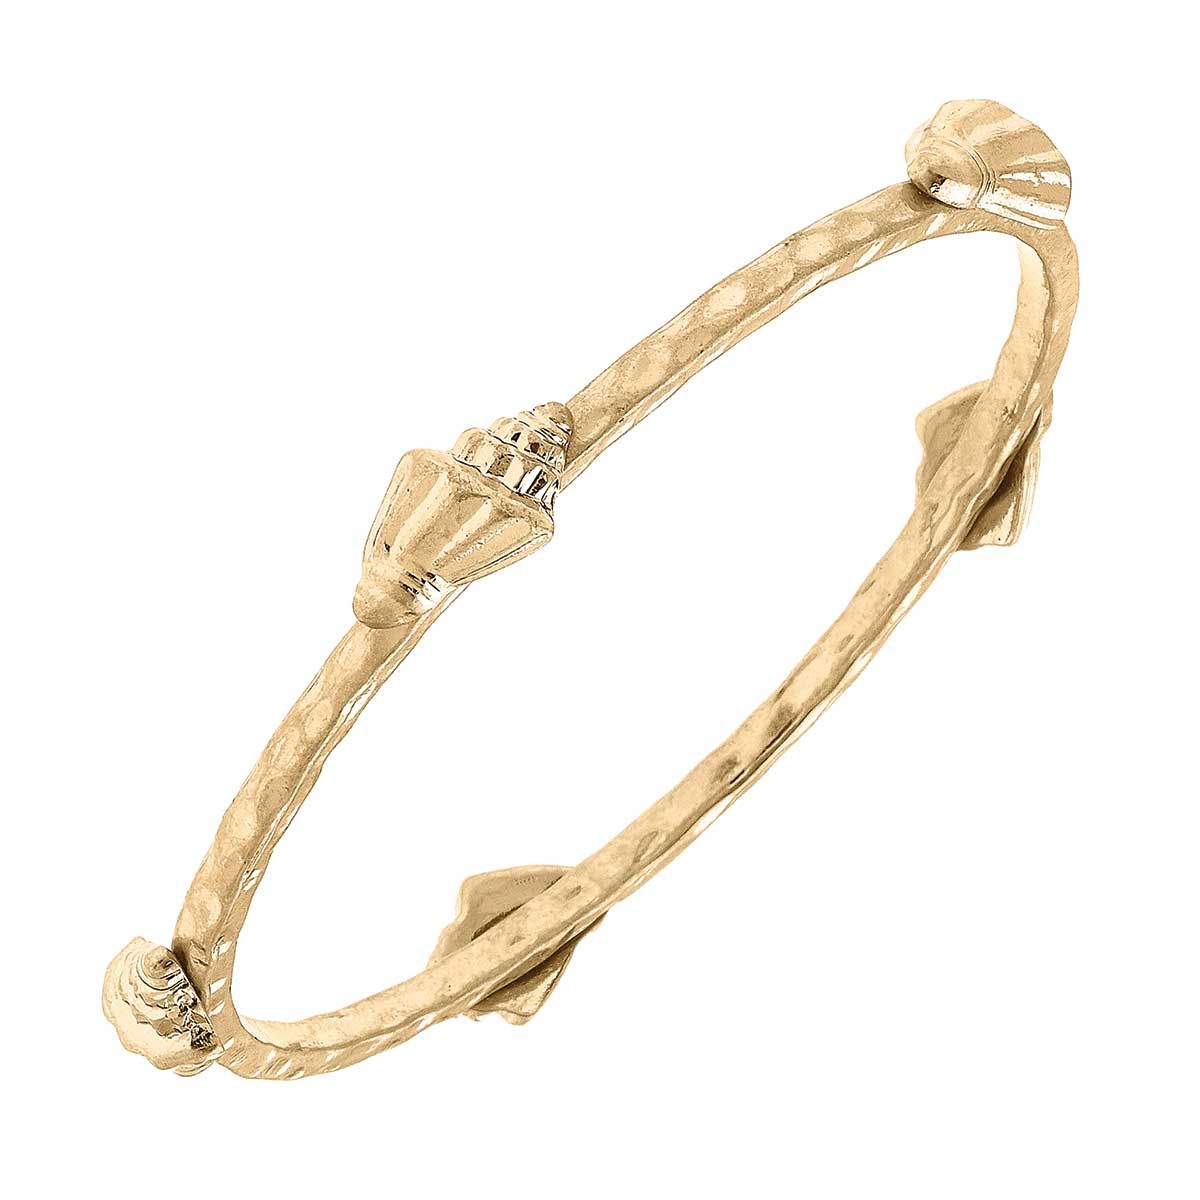 Spiral Shell Bangle in Worn Gold | CANVAS